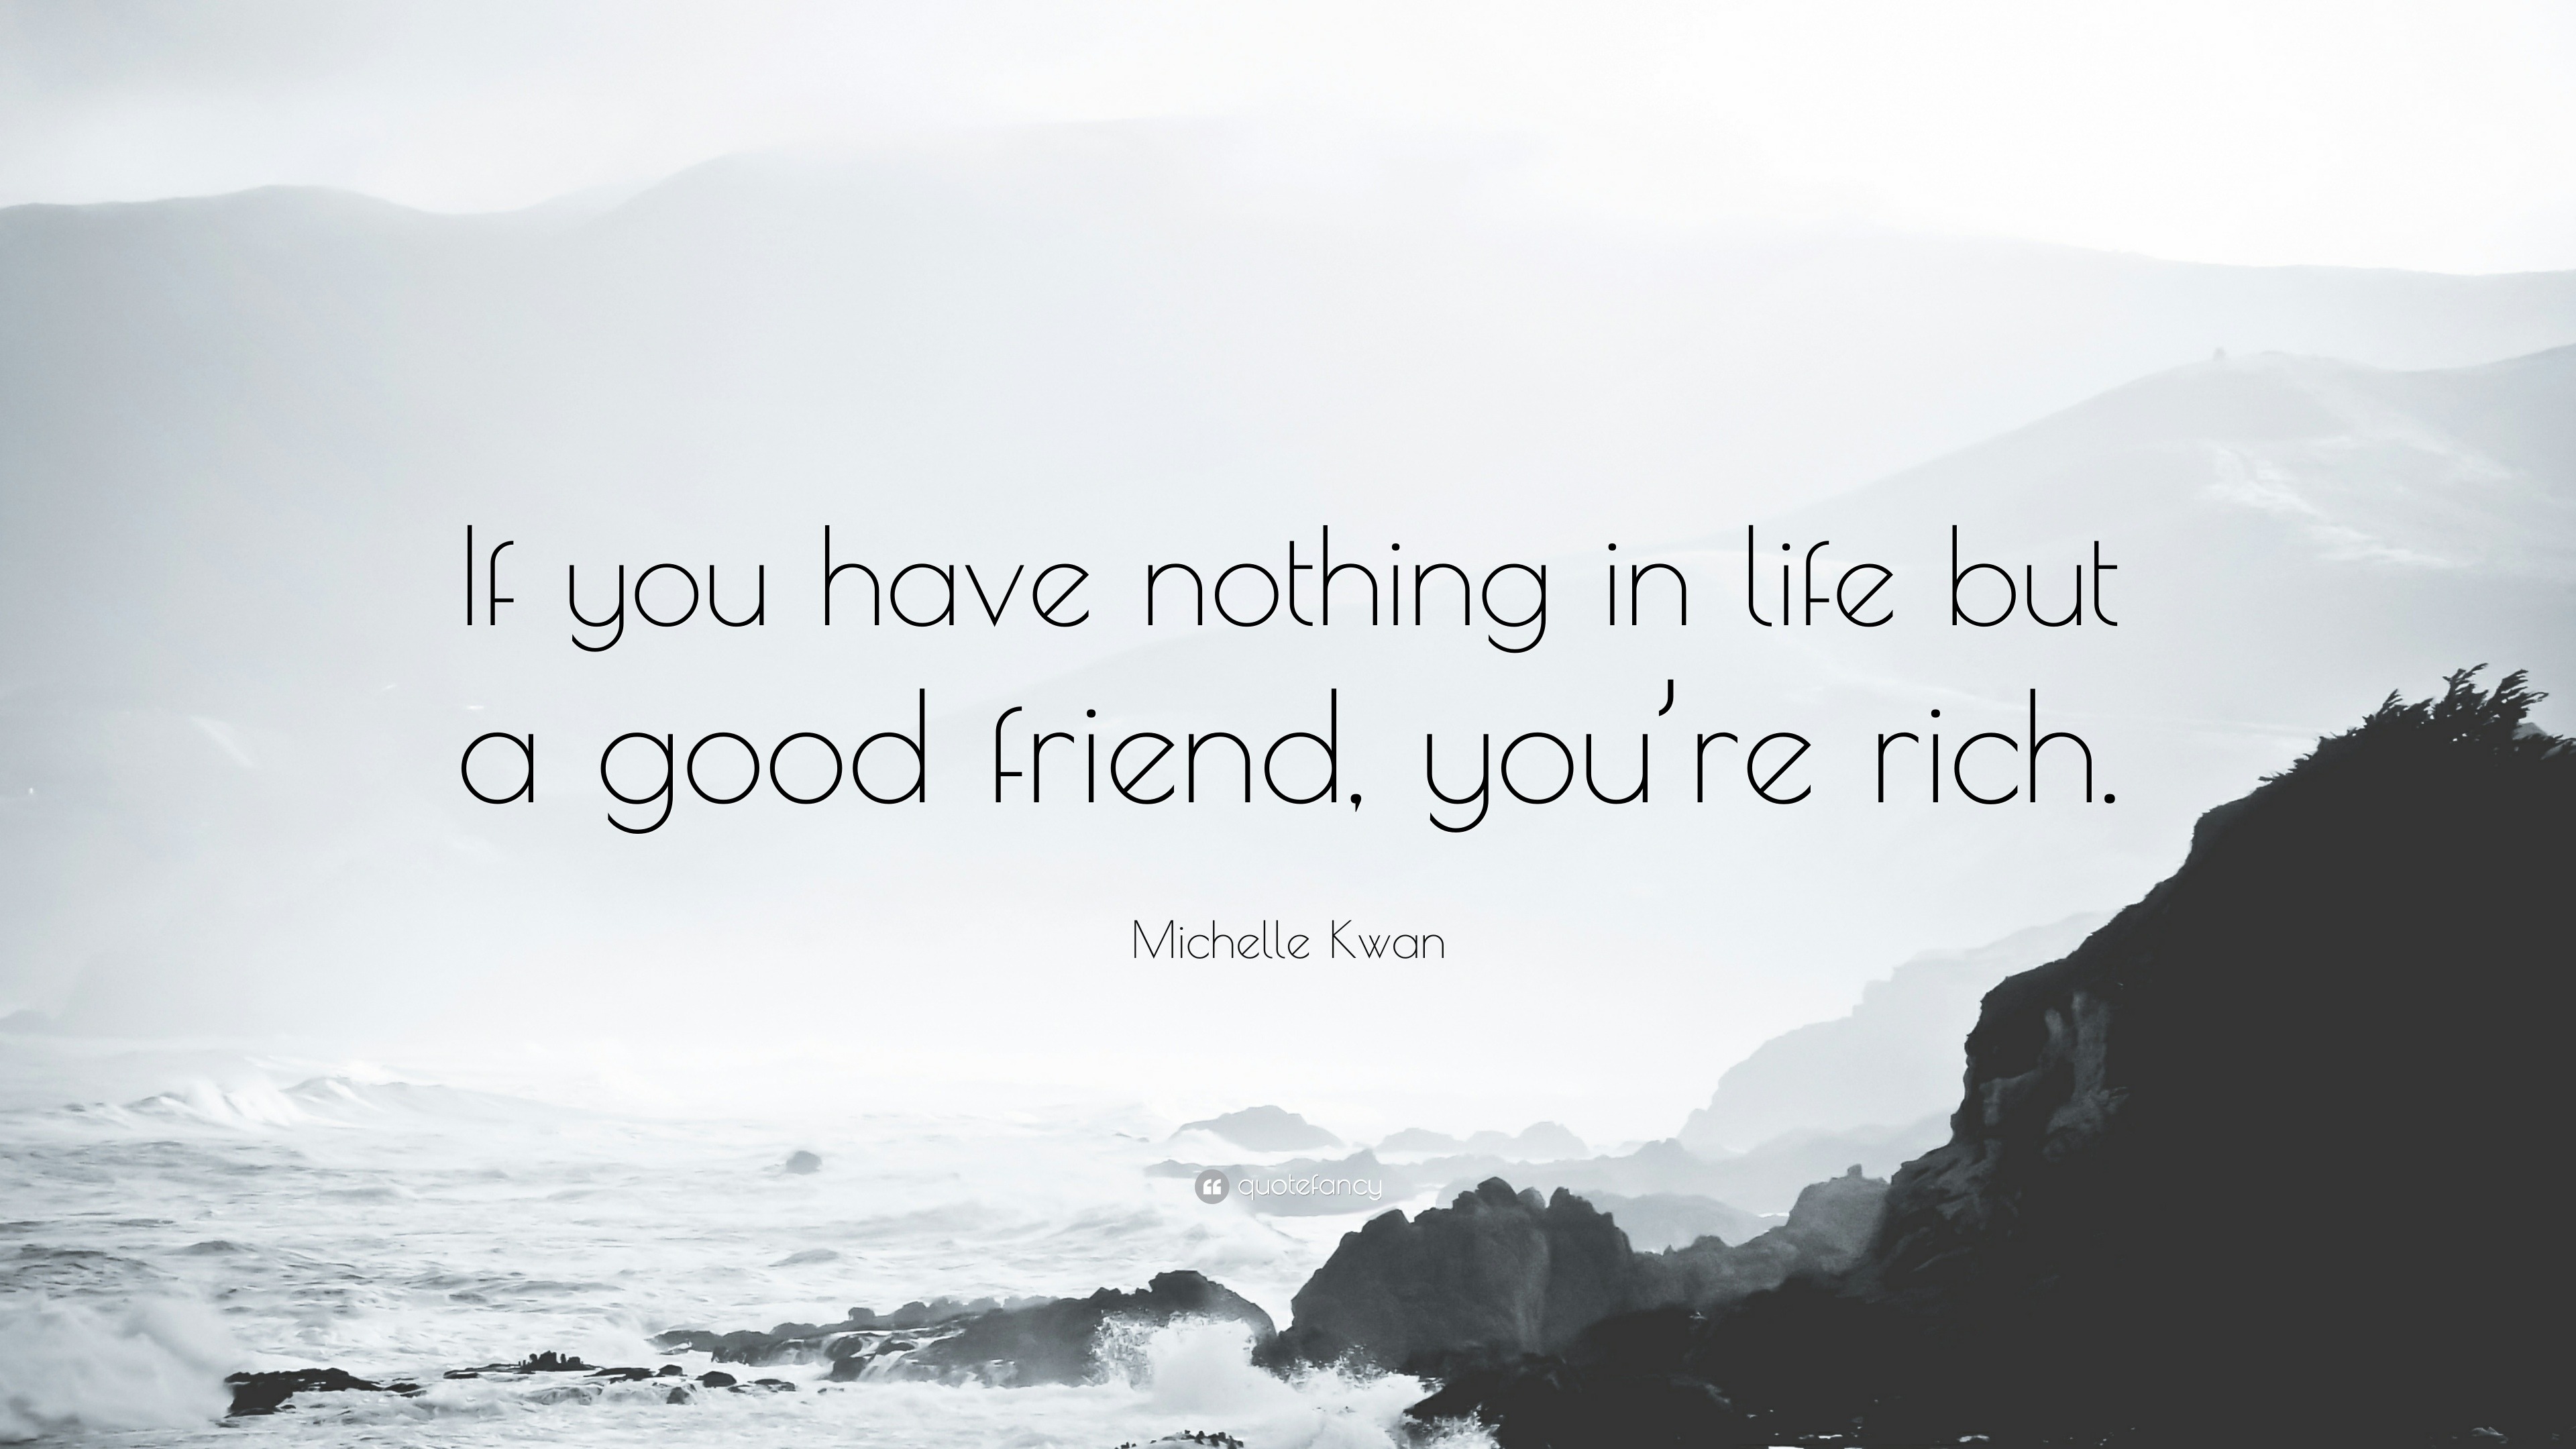 988760-Michelle-Kwan-Quote-If-you-have-nothing-in-life-but-a-good-friend.jpg